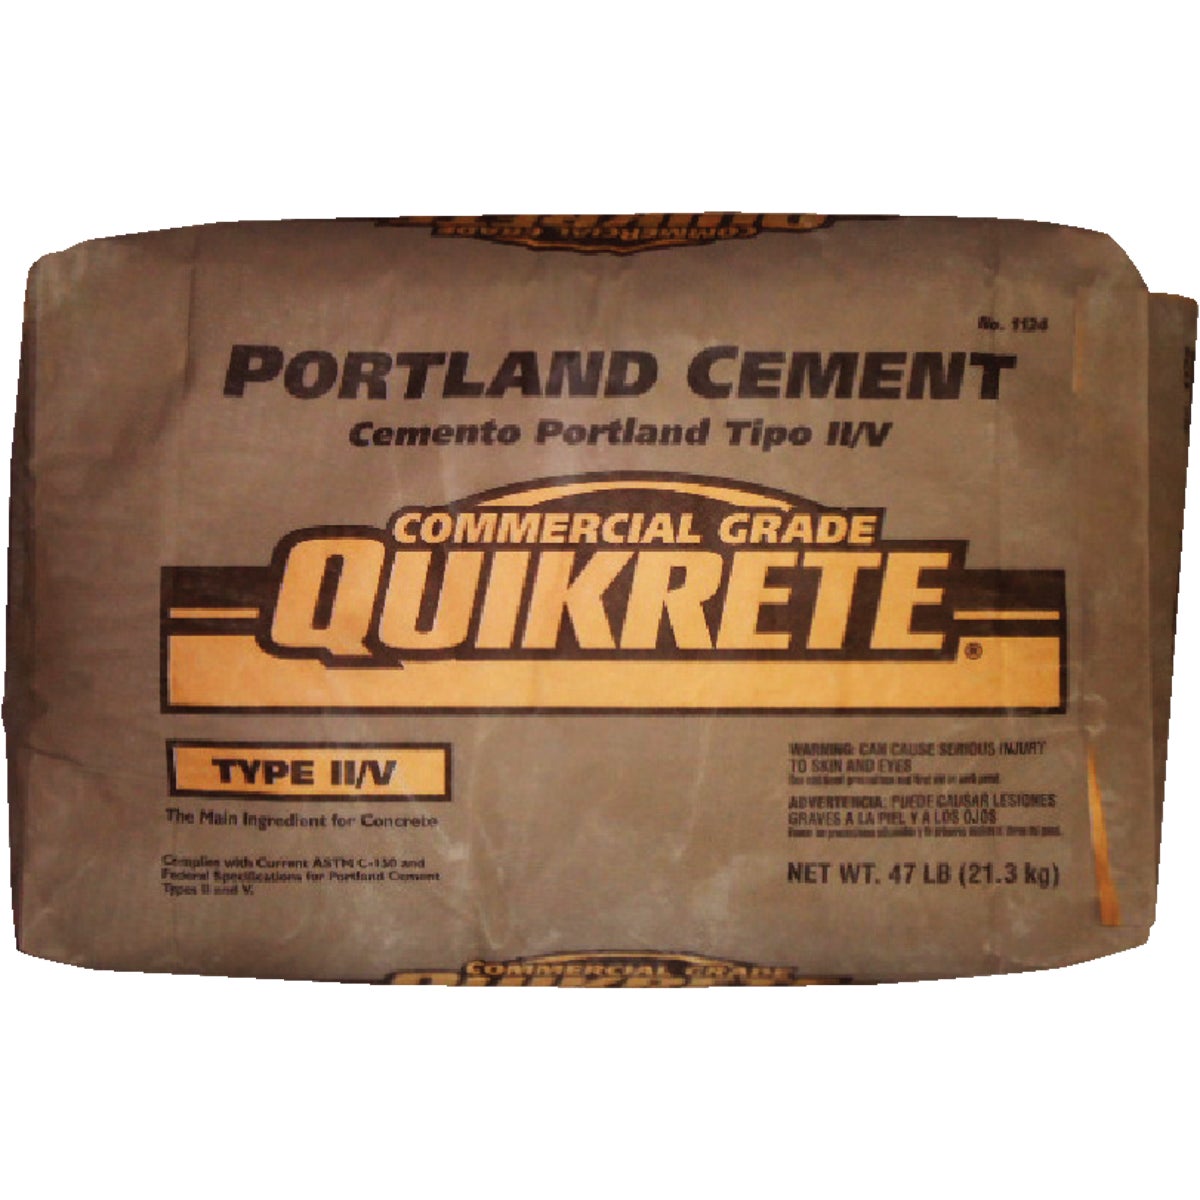 Item 260364, Sulfate-resistant. Meets ASTM C 150 Standard for Portland cement.